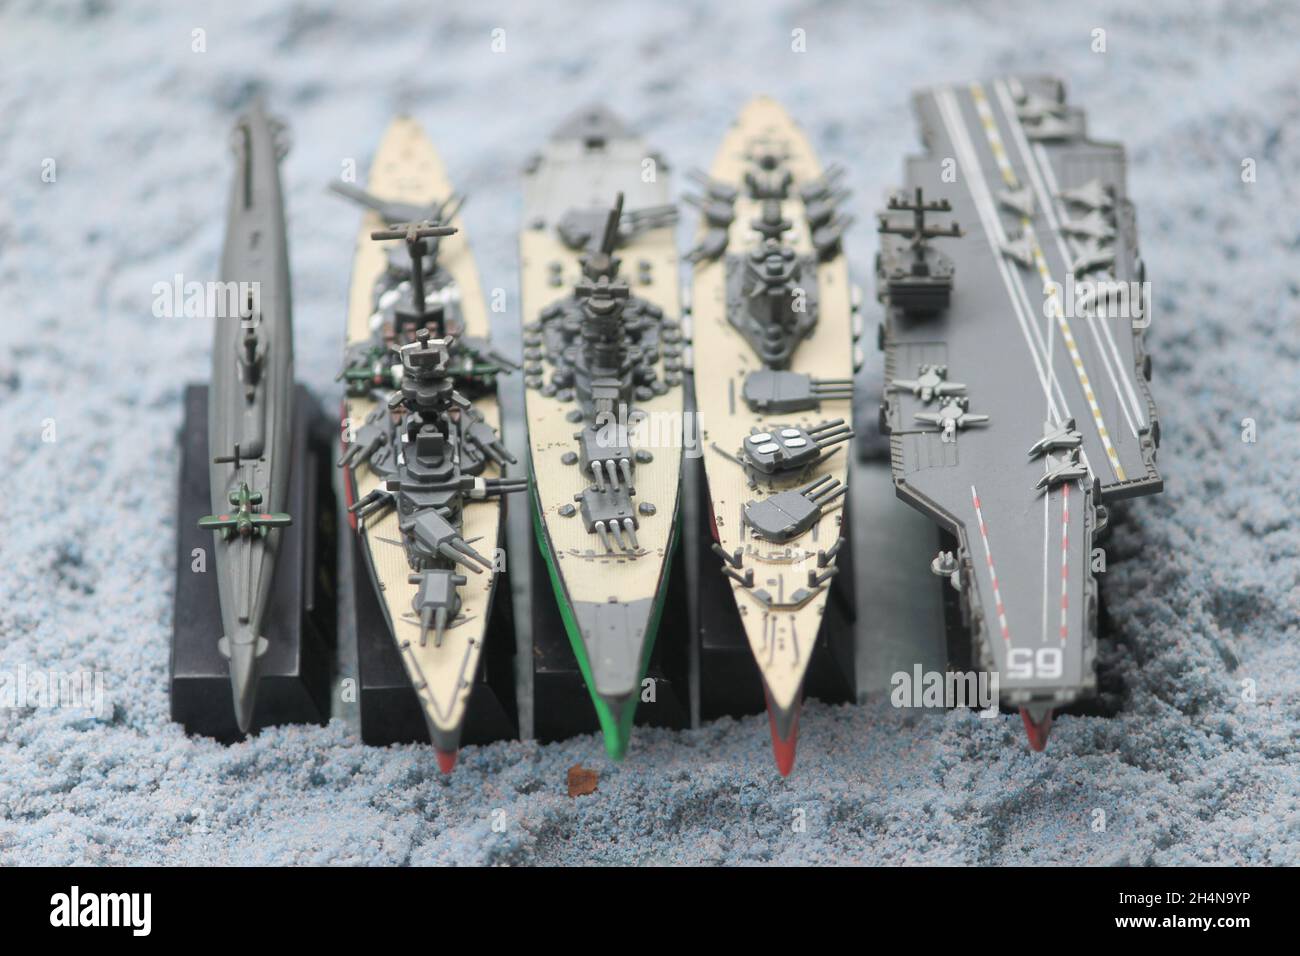 The lineup of miniature battleships consists of the enterprise carrier, the submarine, the battleship Musashi, the battleship Yamato, the main battles Stock Photo